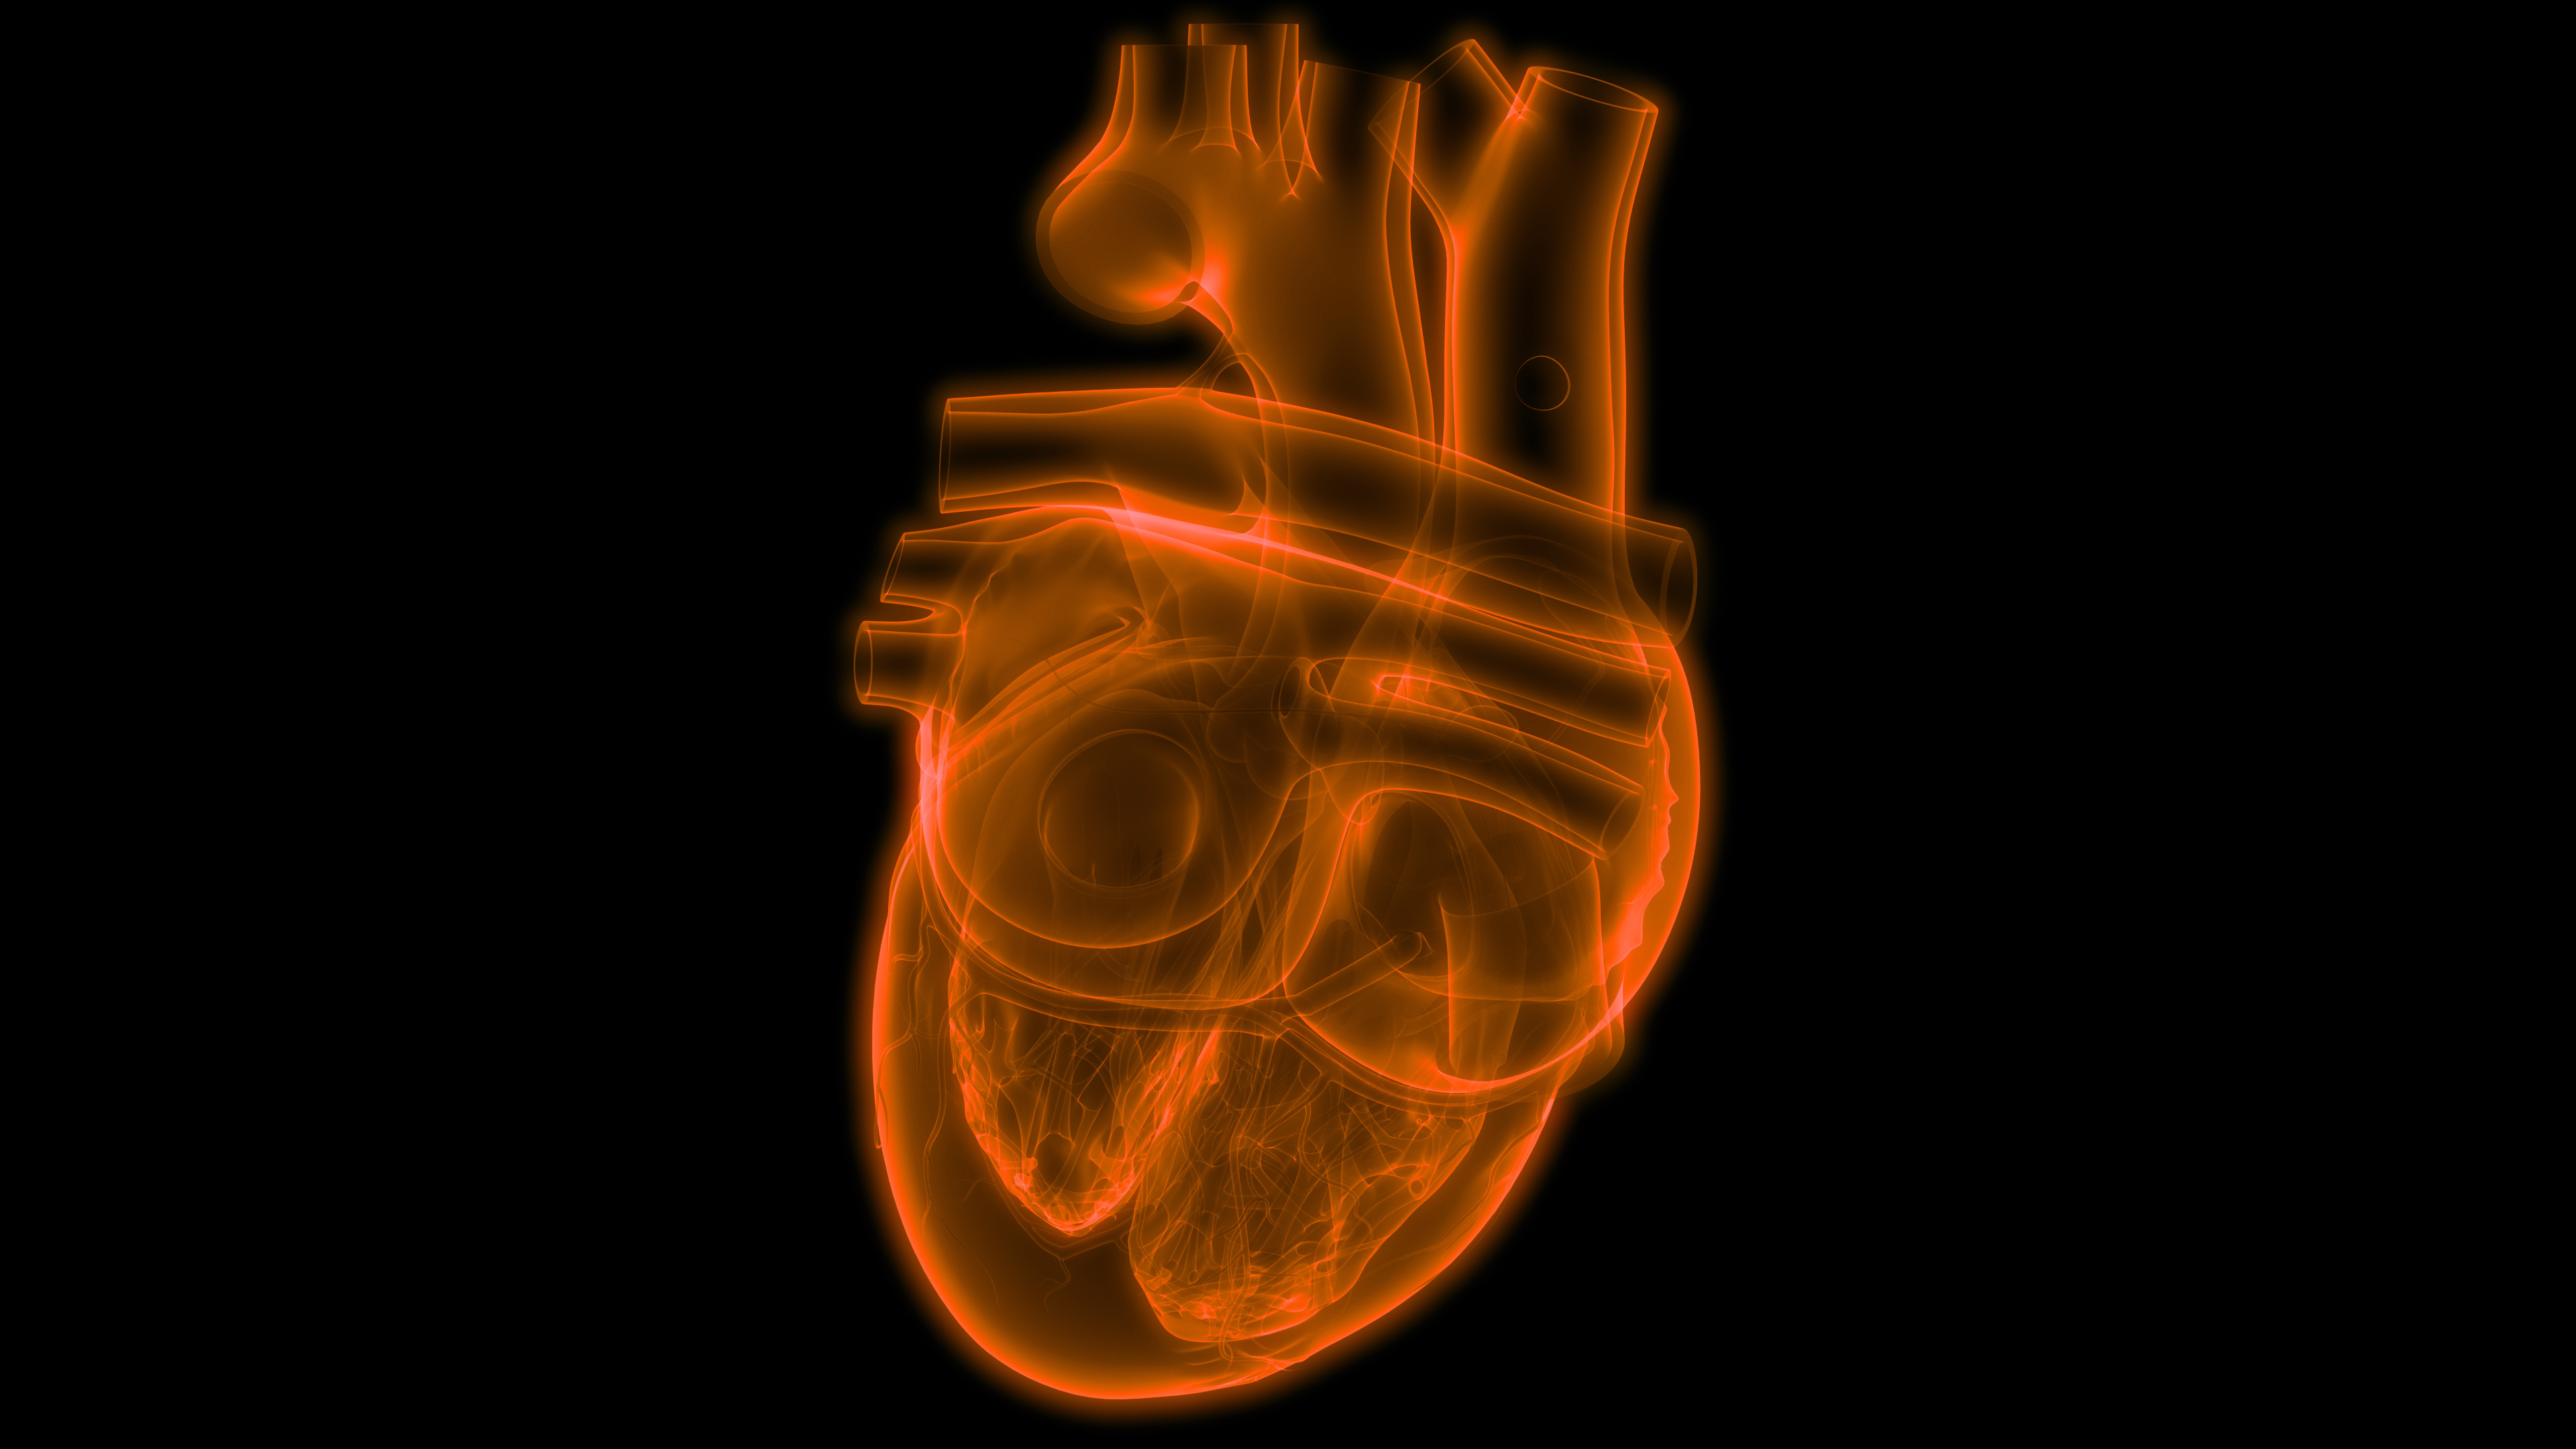 Heart simulation. The Oncological Data and Computational Sciences program is funding a variety of projects looking at cancer. Credit: Oden Institute